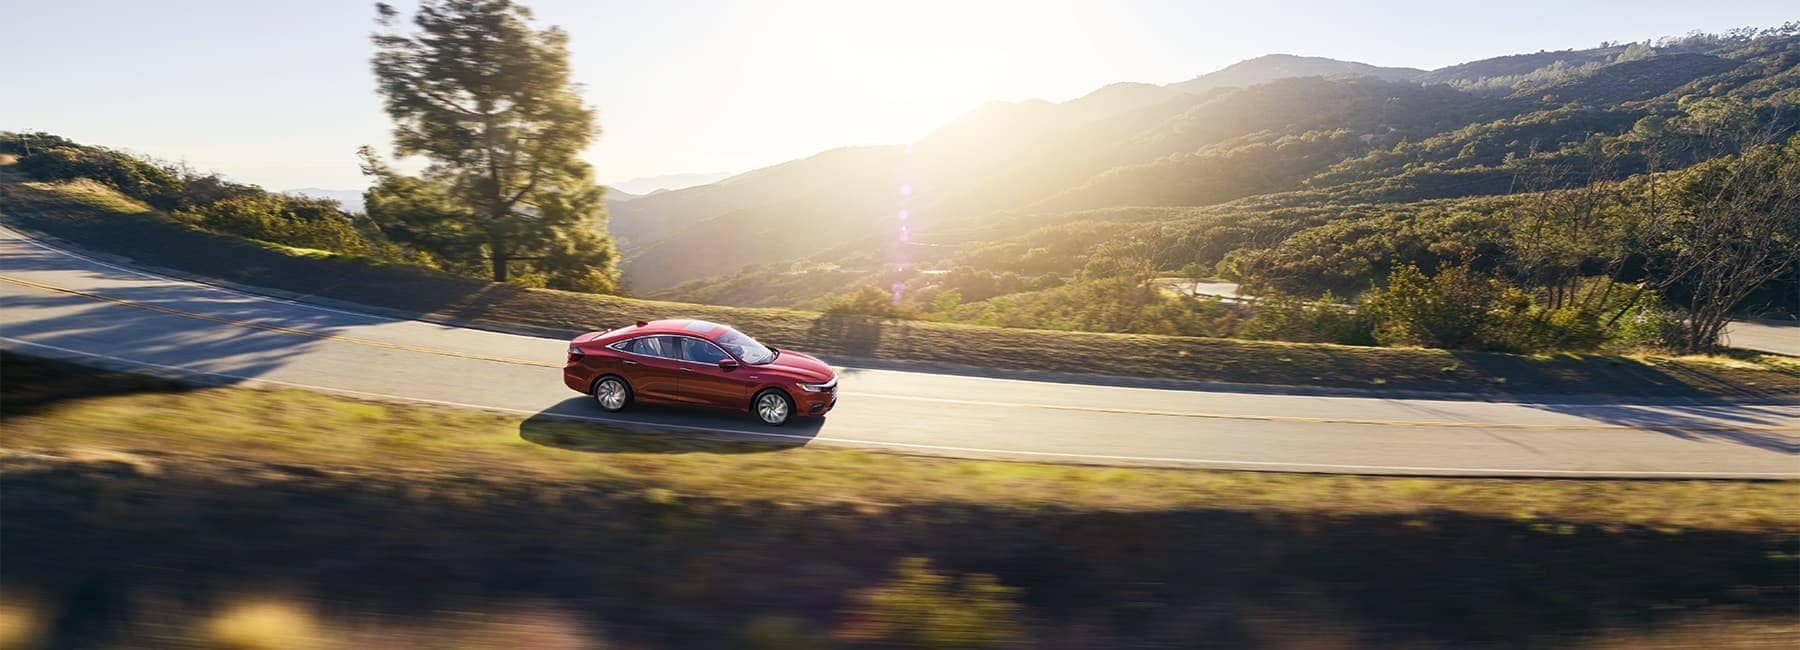 2021-honda-insight-driving-in-the-mountains